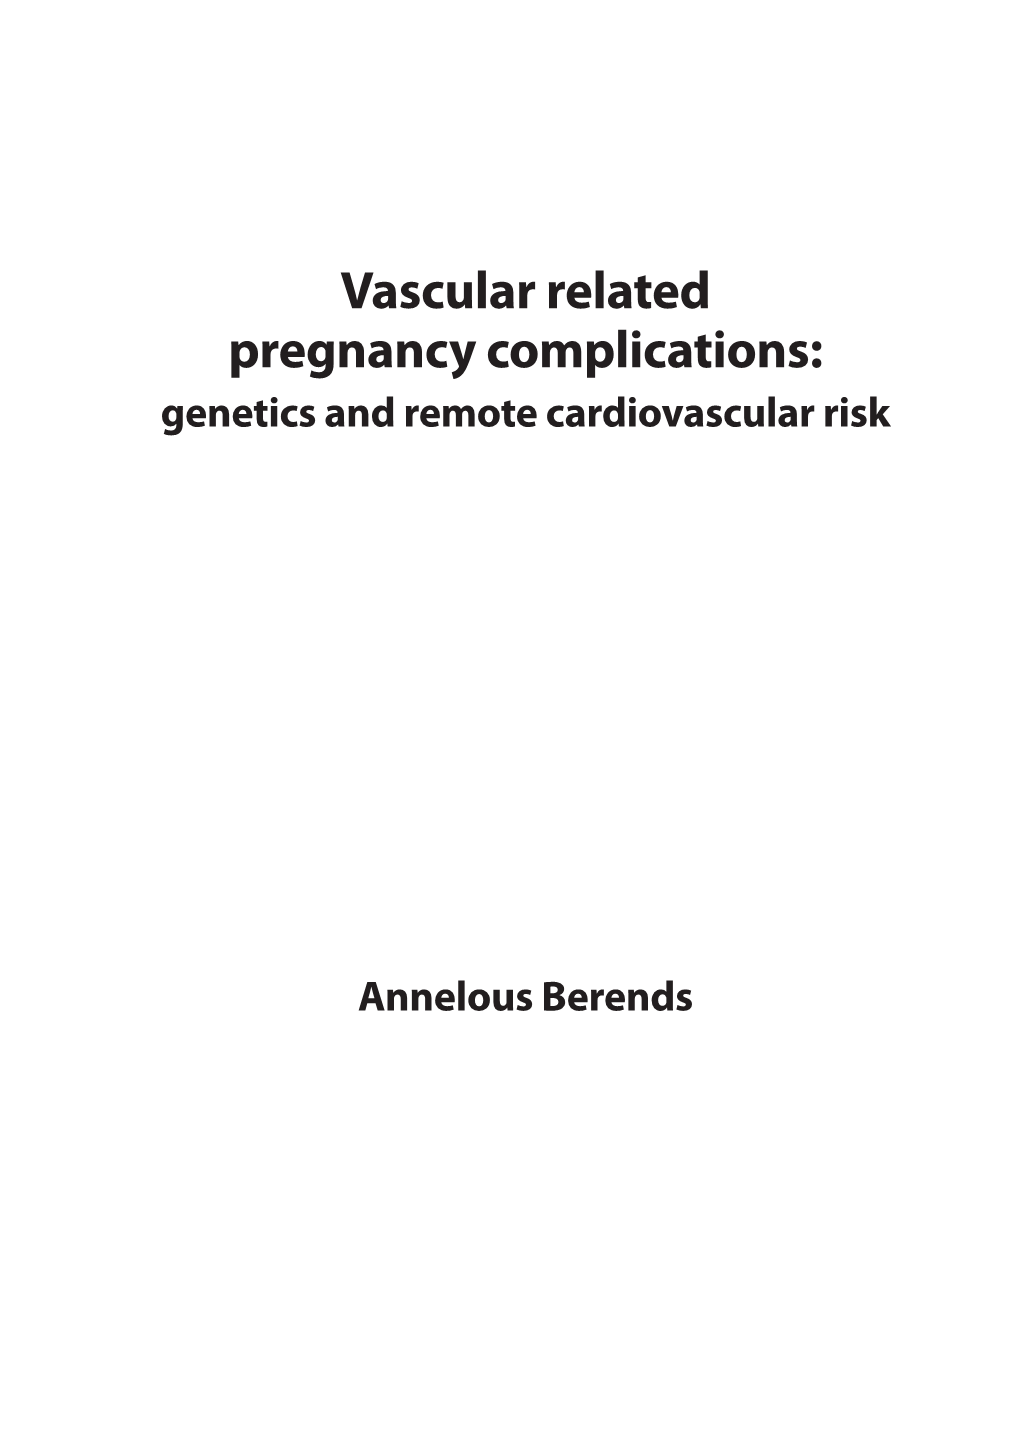 Vascular Related Pregnancy Complications: Genetics and Remote Cardiovascular Risk